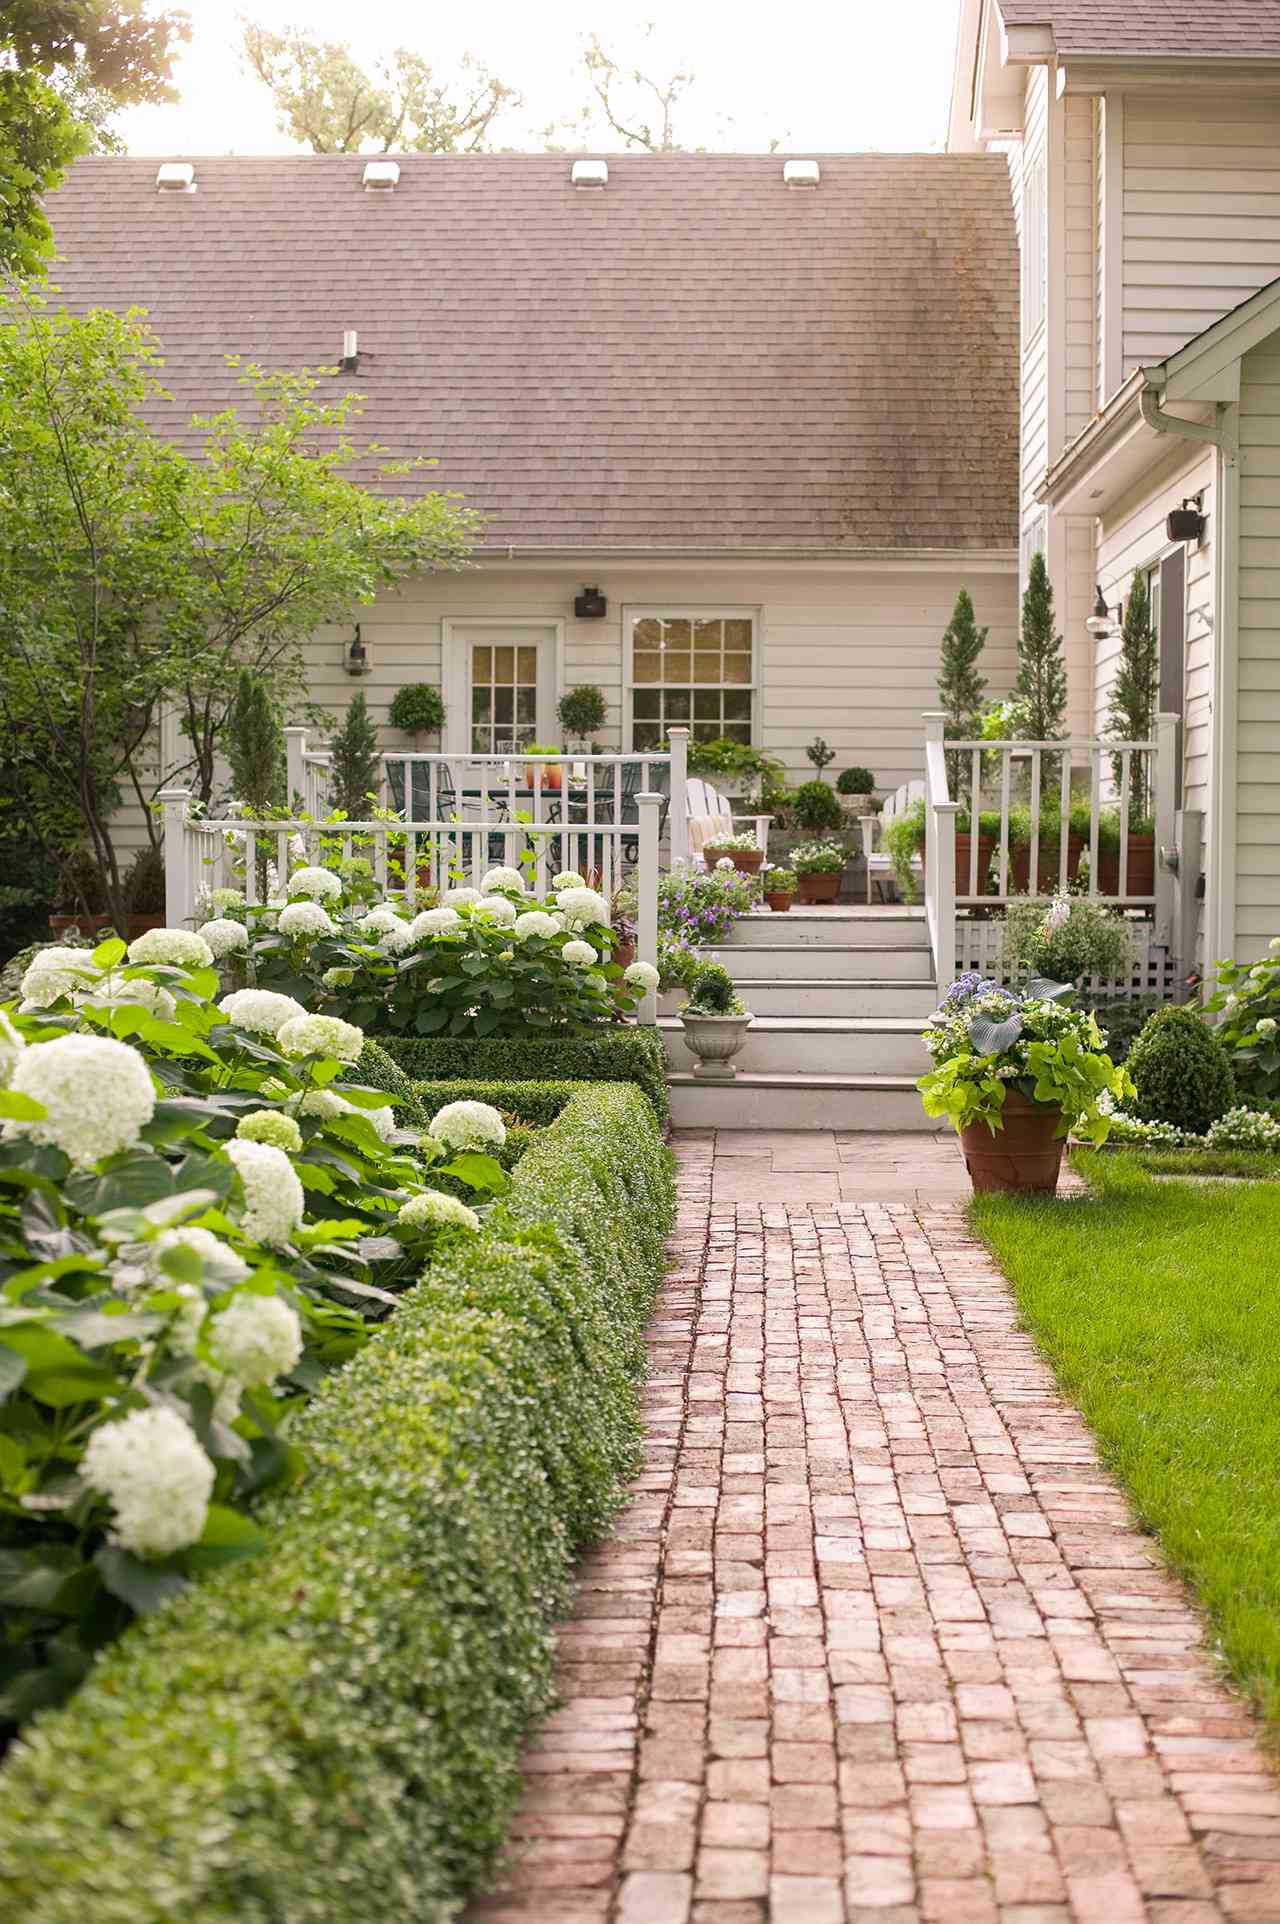  Simple Solutions For Small Space Landscapes Better Homes Gardens